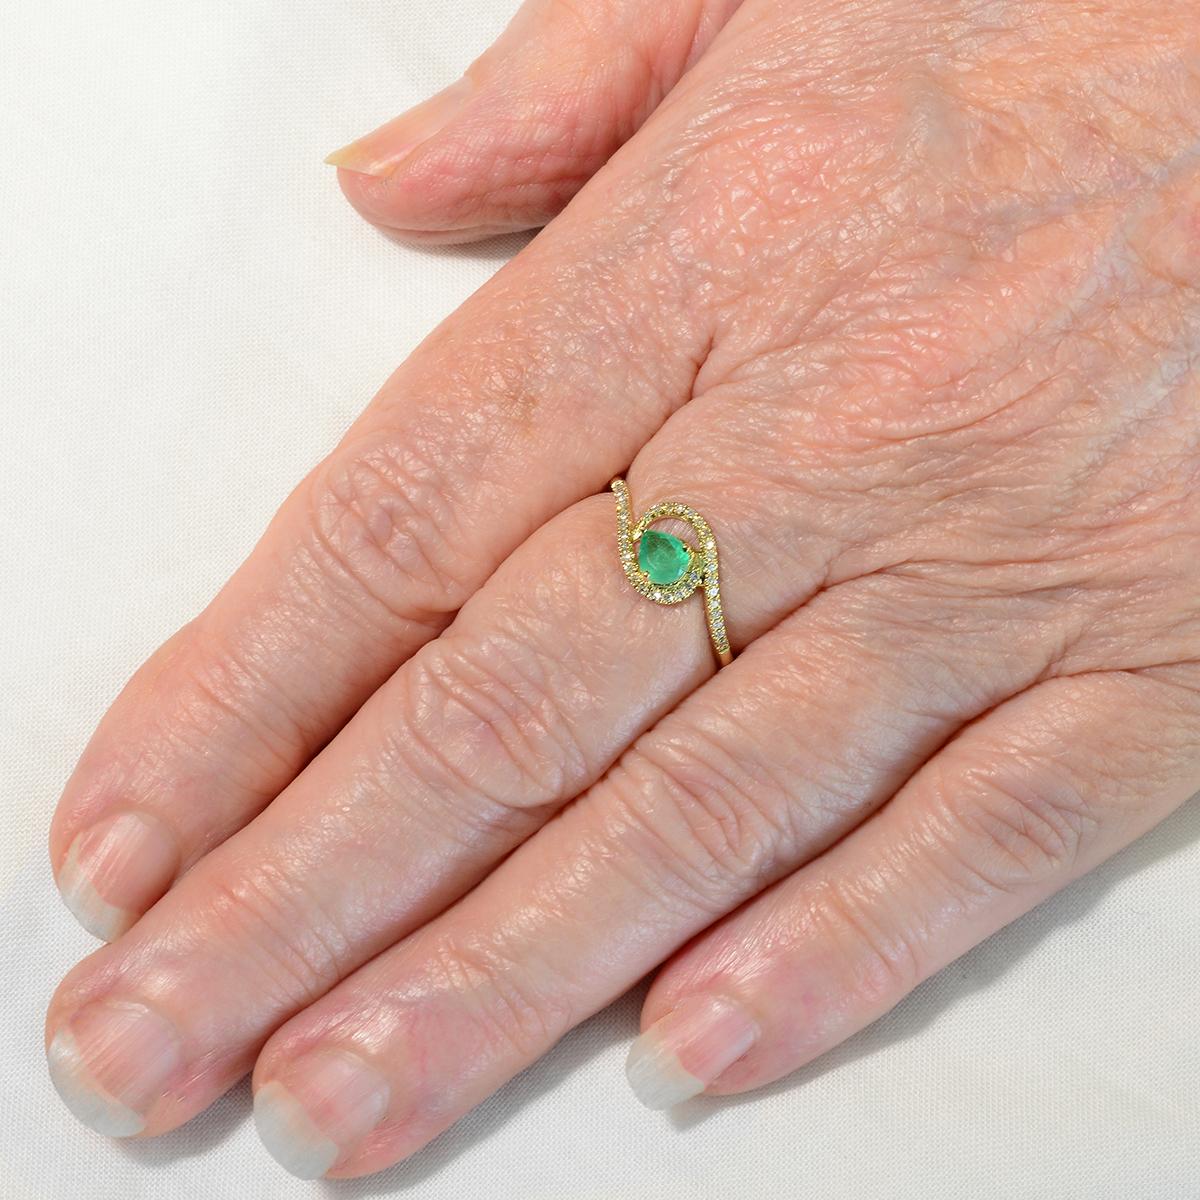 Unique to EK Designs this eye catching diamond ring features a stunning natural emerald embellished with bright microset diamonds set in solid 9K yellow gold. The 0.30 carat natural pear cut emerald is secured by 3 claws in an open back setting to